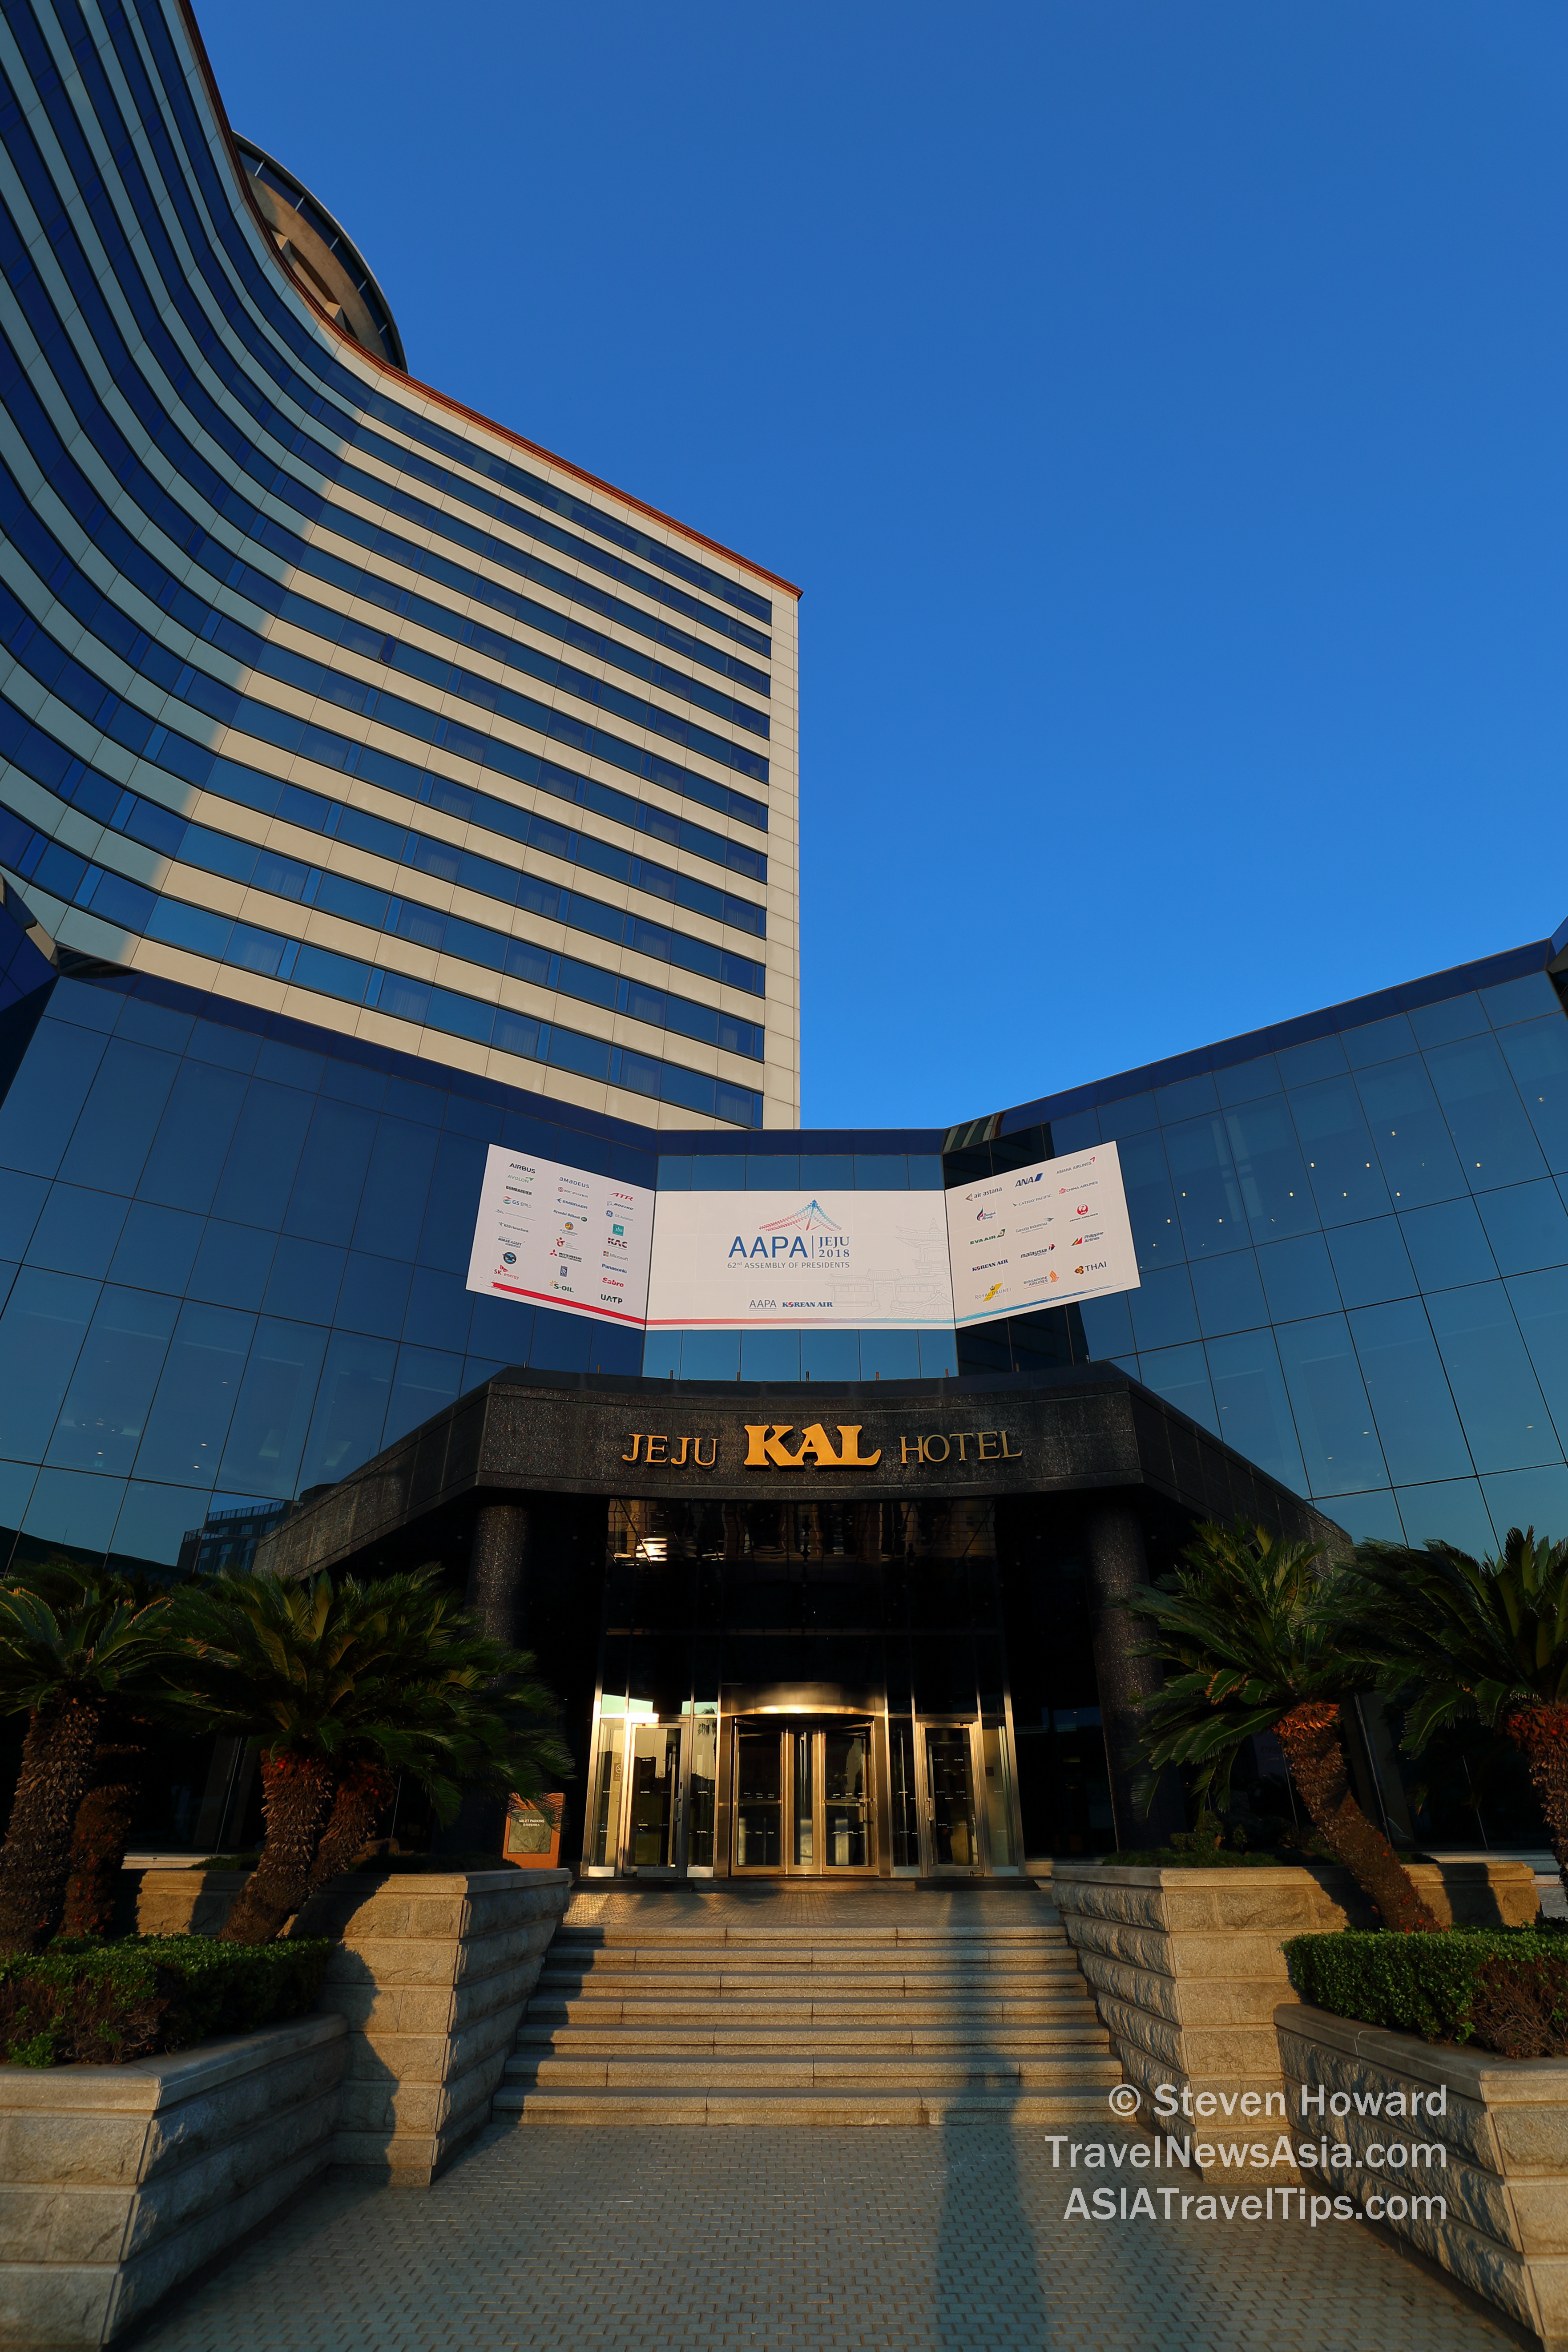 The KAL Hotel in Jeju, South Korea hosted the AAPA 62nd Assembly of Presidents on 18-19 October 2018. Picture by Steven Howard of TravelNewsAsia.com Click to enlarge.